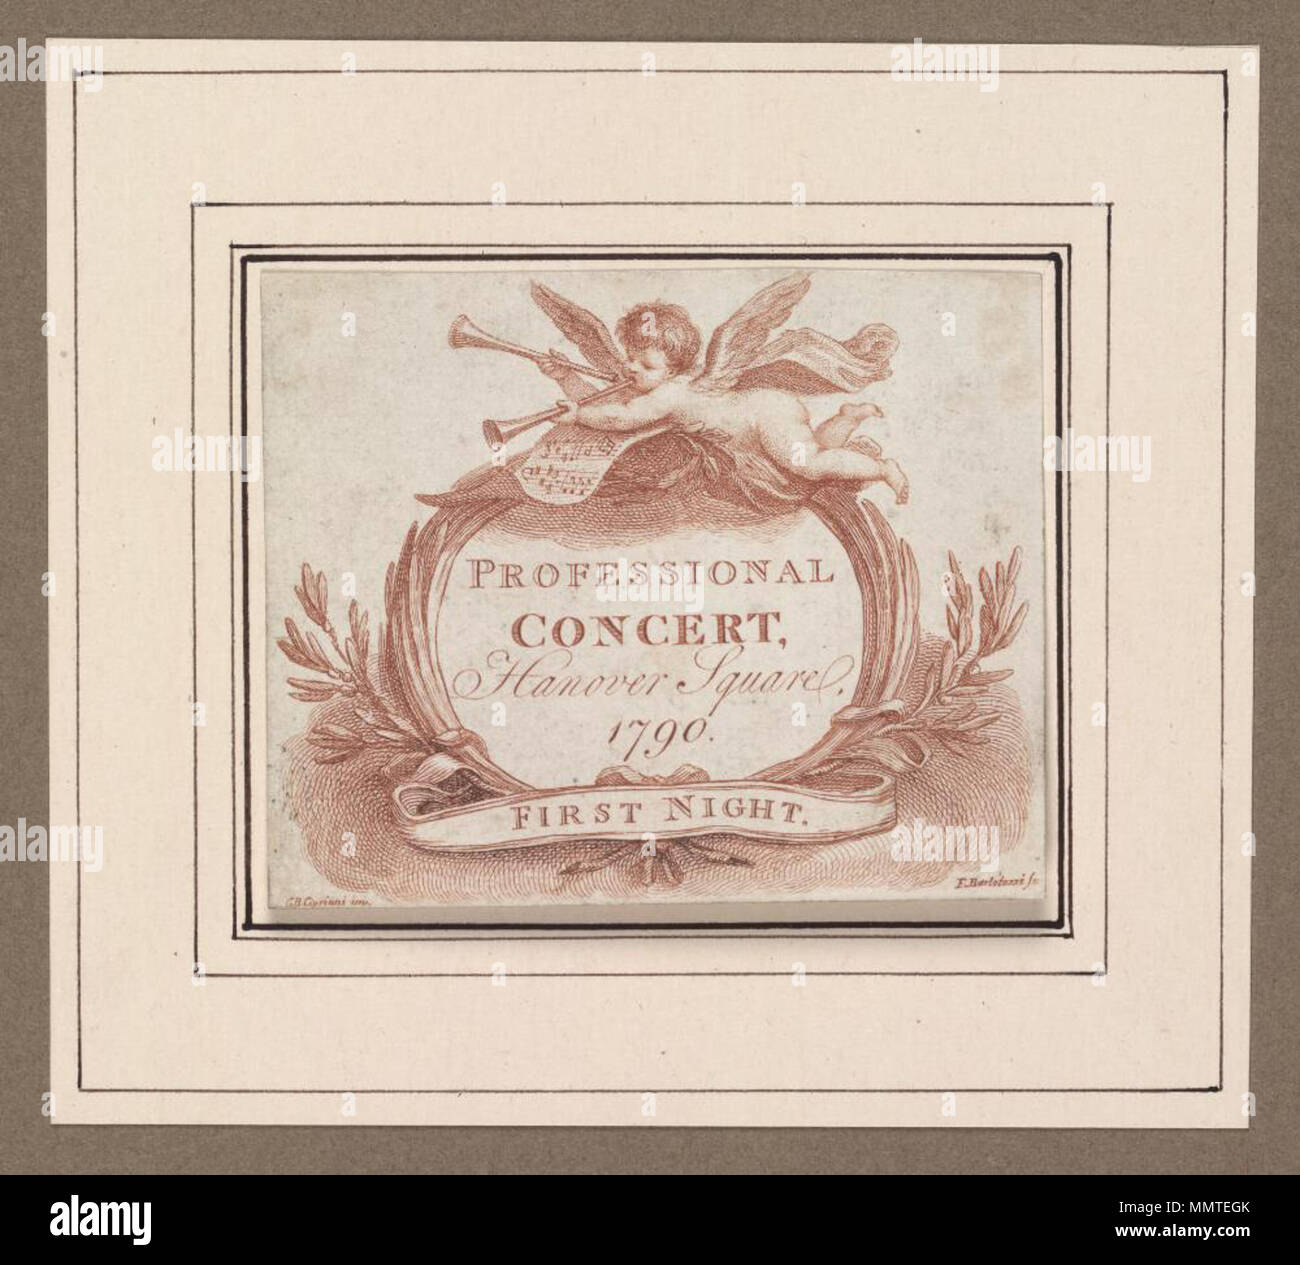 . Ticket for a professional concert at Hanover Square, 1790; 'first night'. Printed in brown ink; Professional concert; [Ticket for a professional concert at Hanover Square, 1790 ]  [Ticket for a professional concert at Hanover Square, 1790 ]. 1790. Hanover Square ([London], England) [author] Bodleian Libraries, Ticket for a professional concert at Hanover Square, 1790 Stock Photo